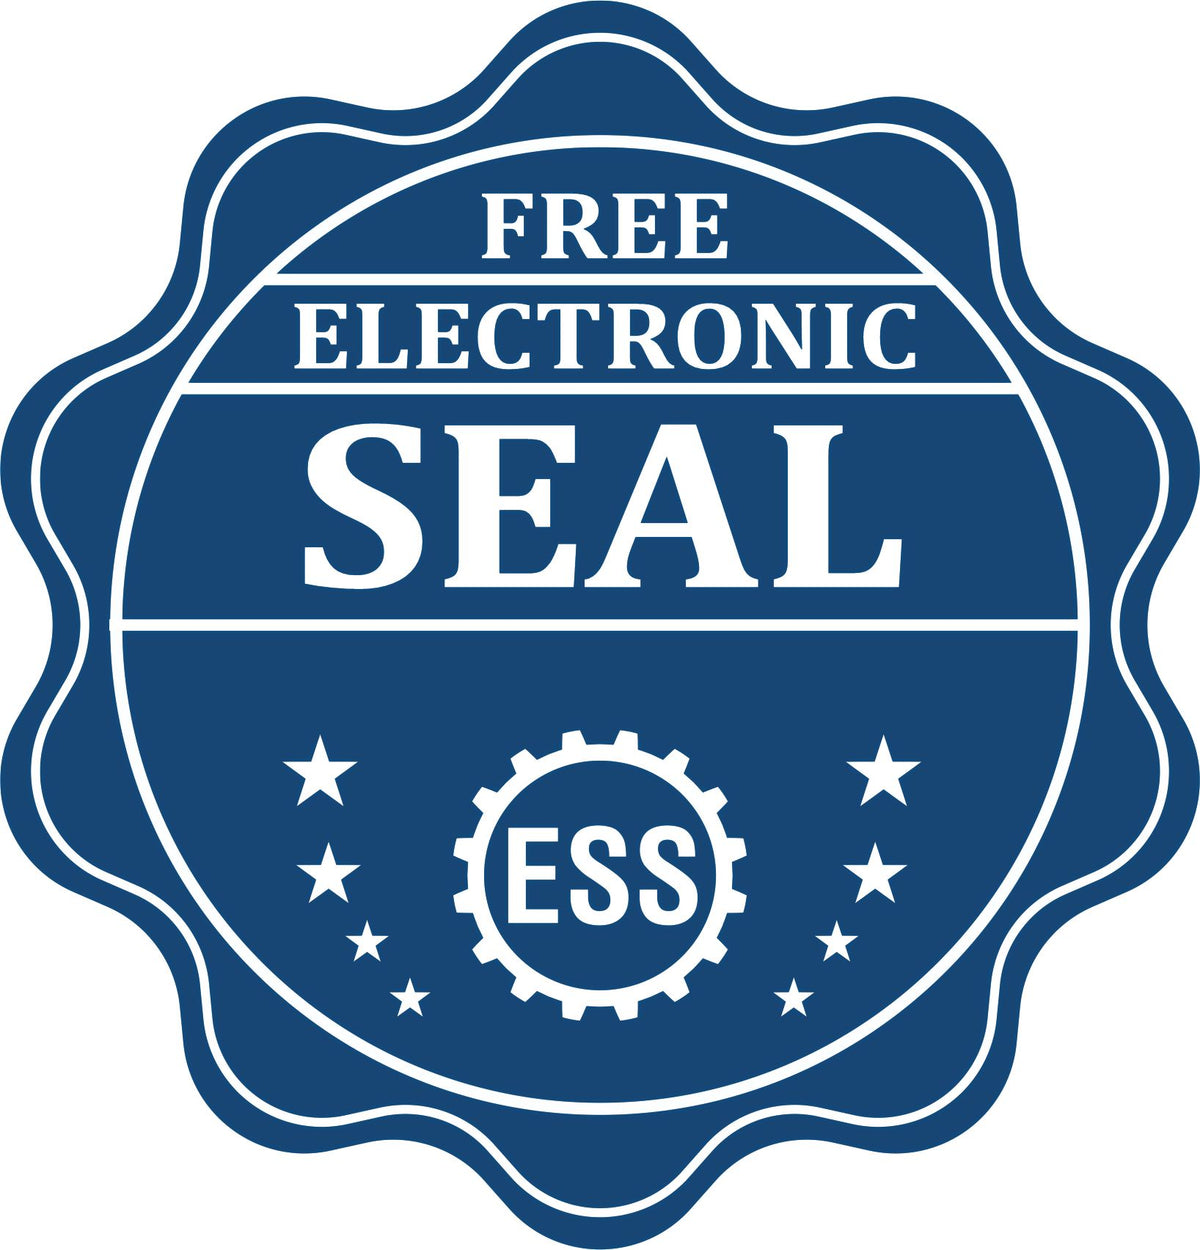 A badge showing a free electronic seal for the Premium MaxLight Pre-Inked Utah Landscape Architectural Stamp with stars and the ESS gear on the emblem.